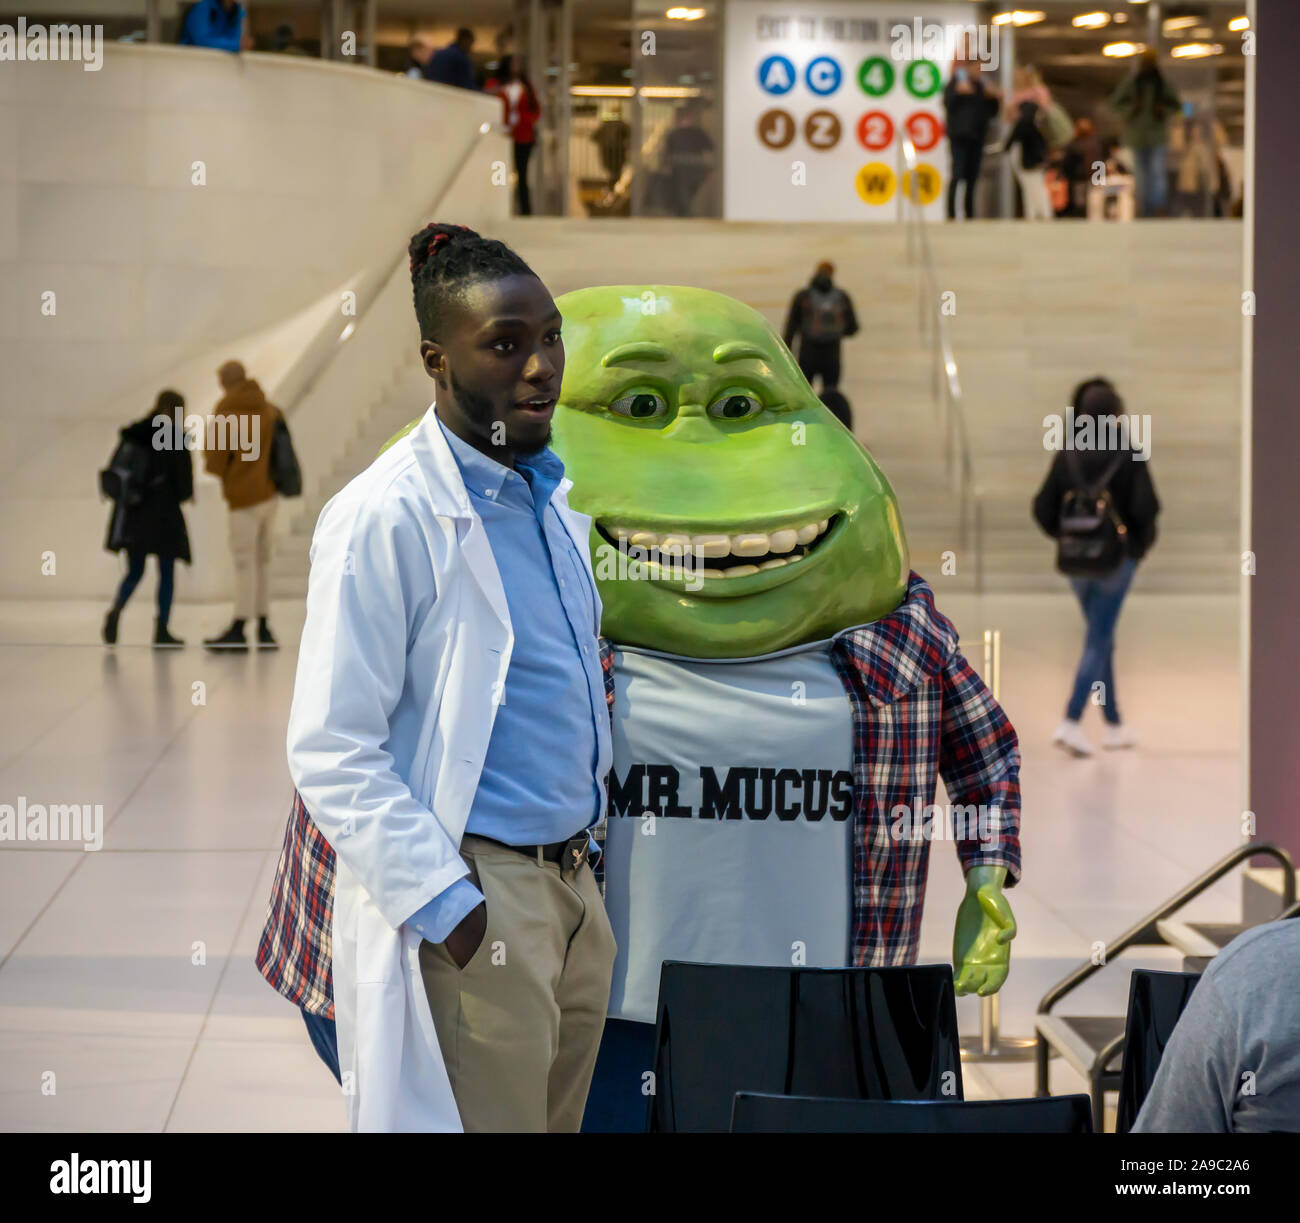 Mr. Mucus, mascot of Reckitt Benckiser’s Muciniex brand cold and cough medicine at a Mucinex branding event in the WTC Oculus in New York on Tuesday, November 12, 2019. (© Richard B. Levine) Stock Photo